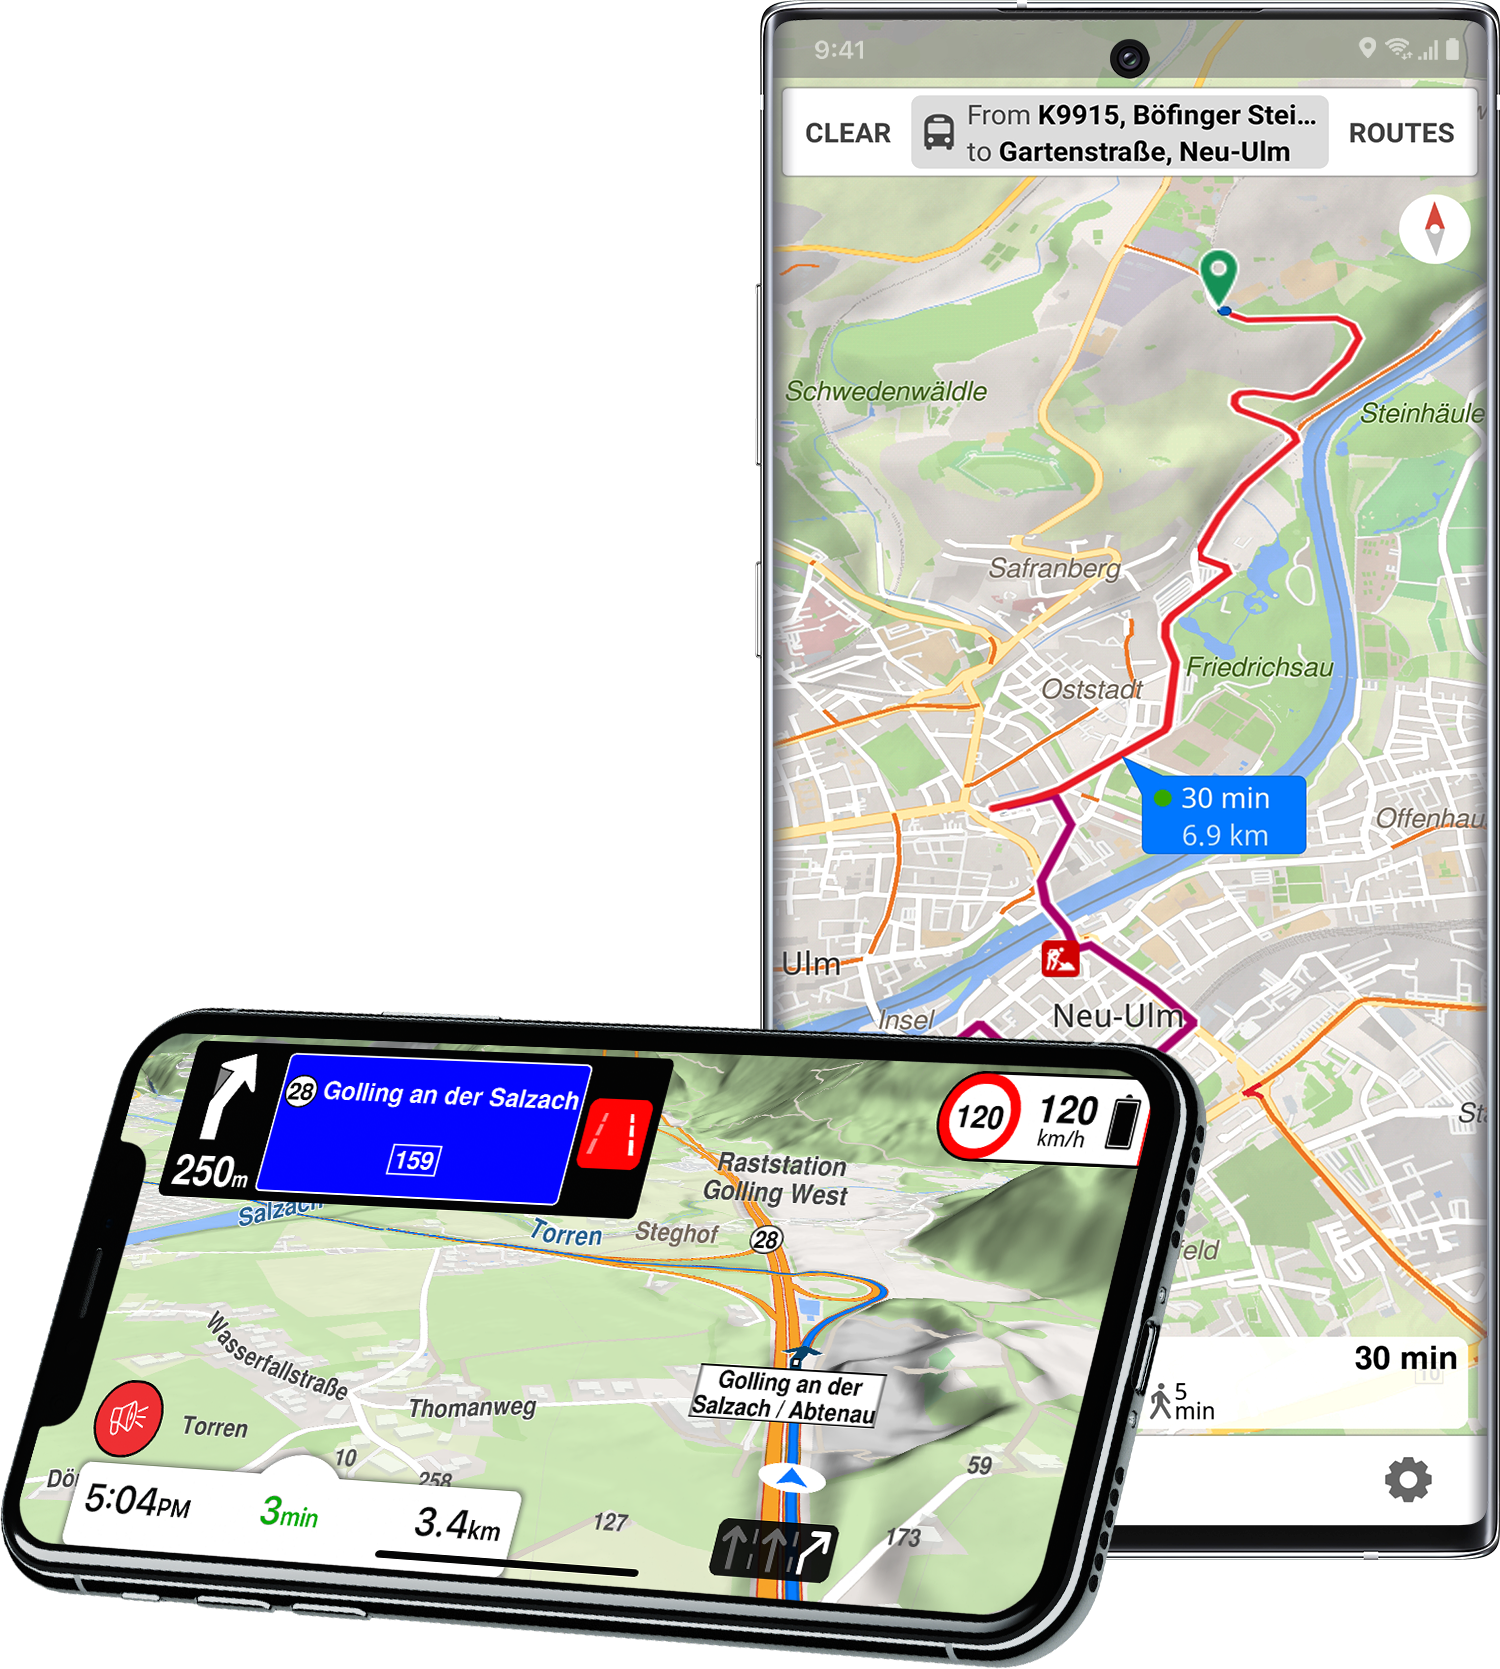 gps maps free download for android